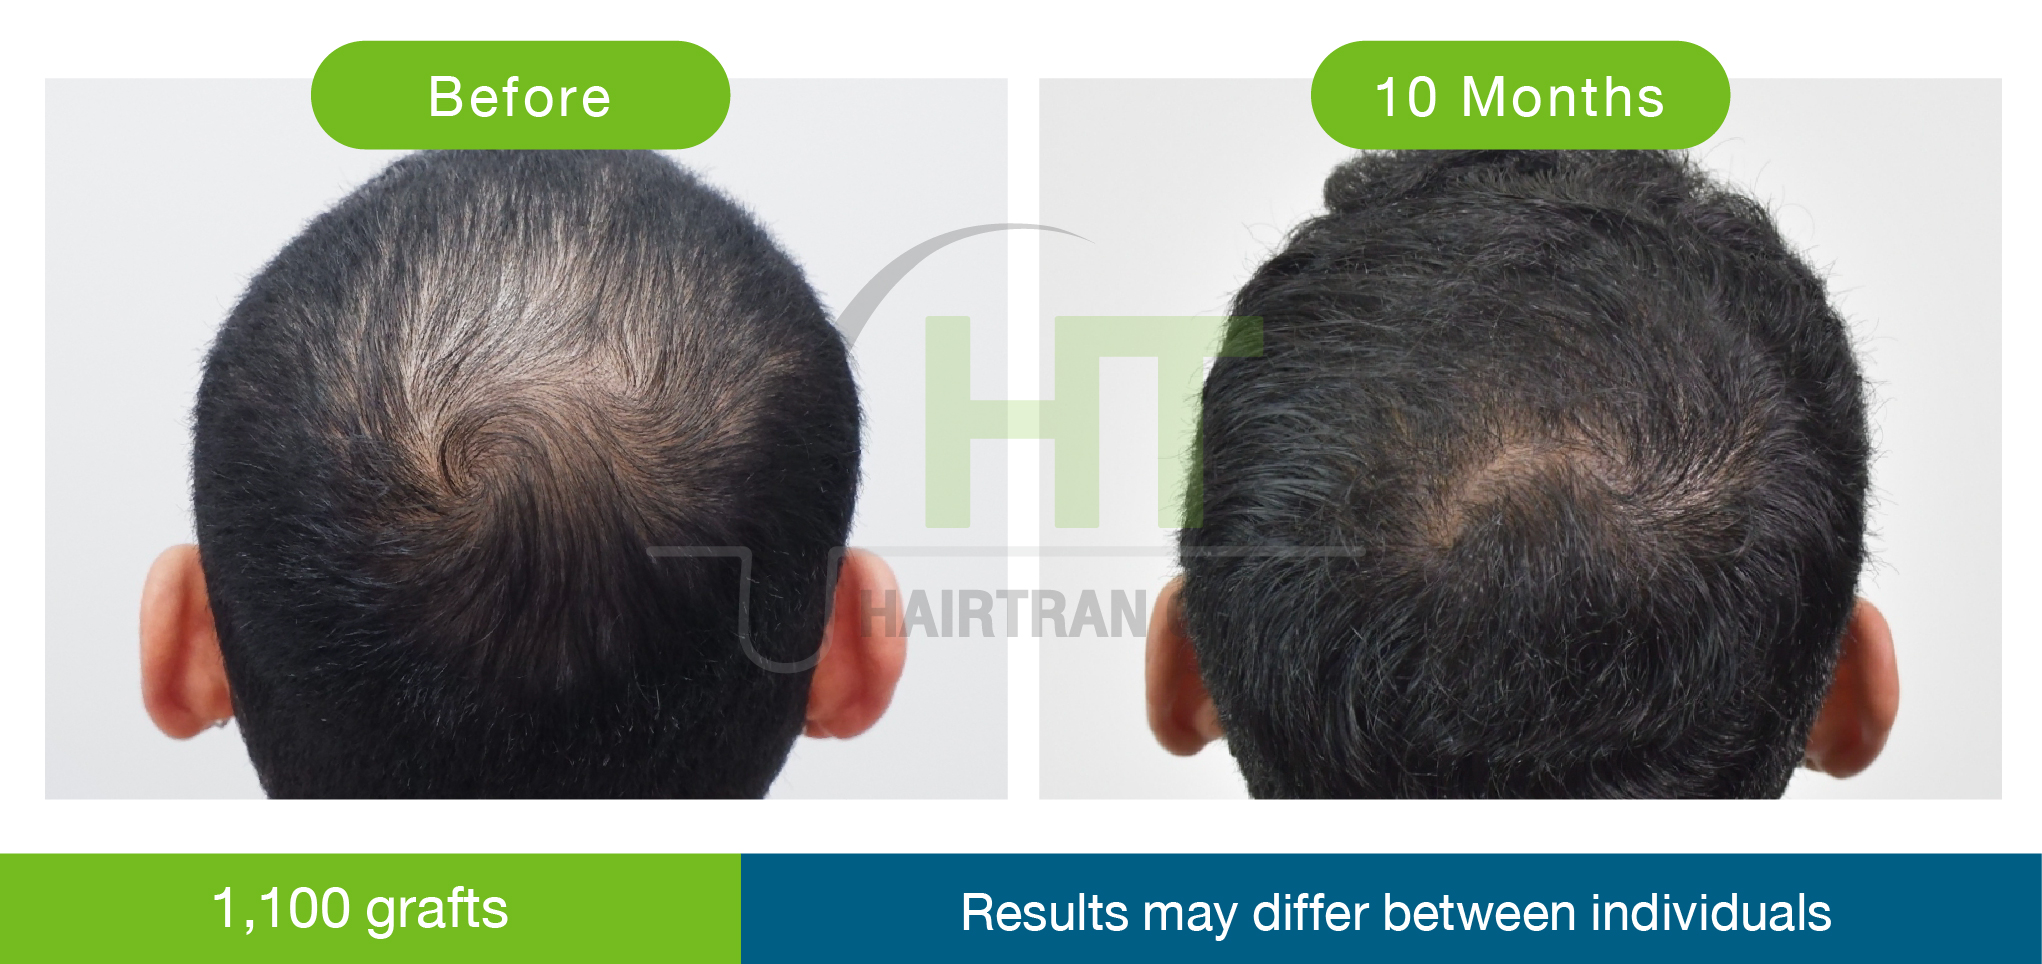 How much does hair transplant Thailand cost? - Hairtran Clinic